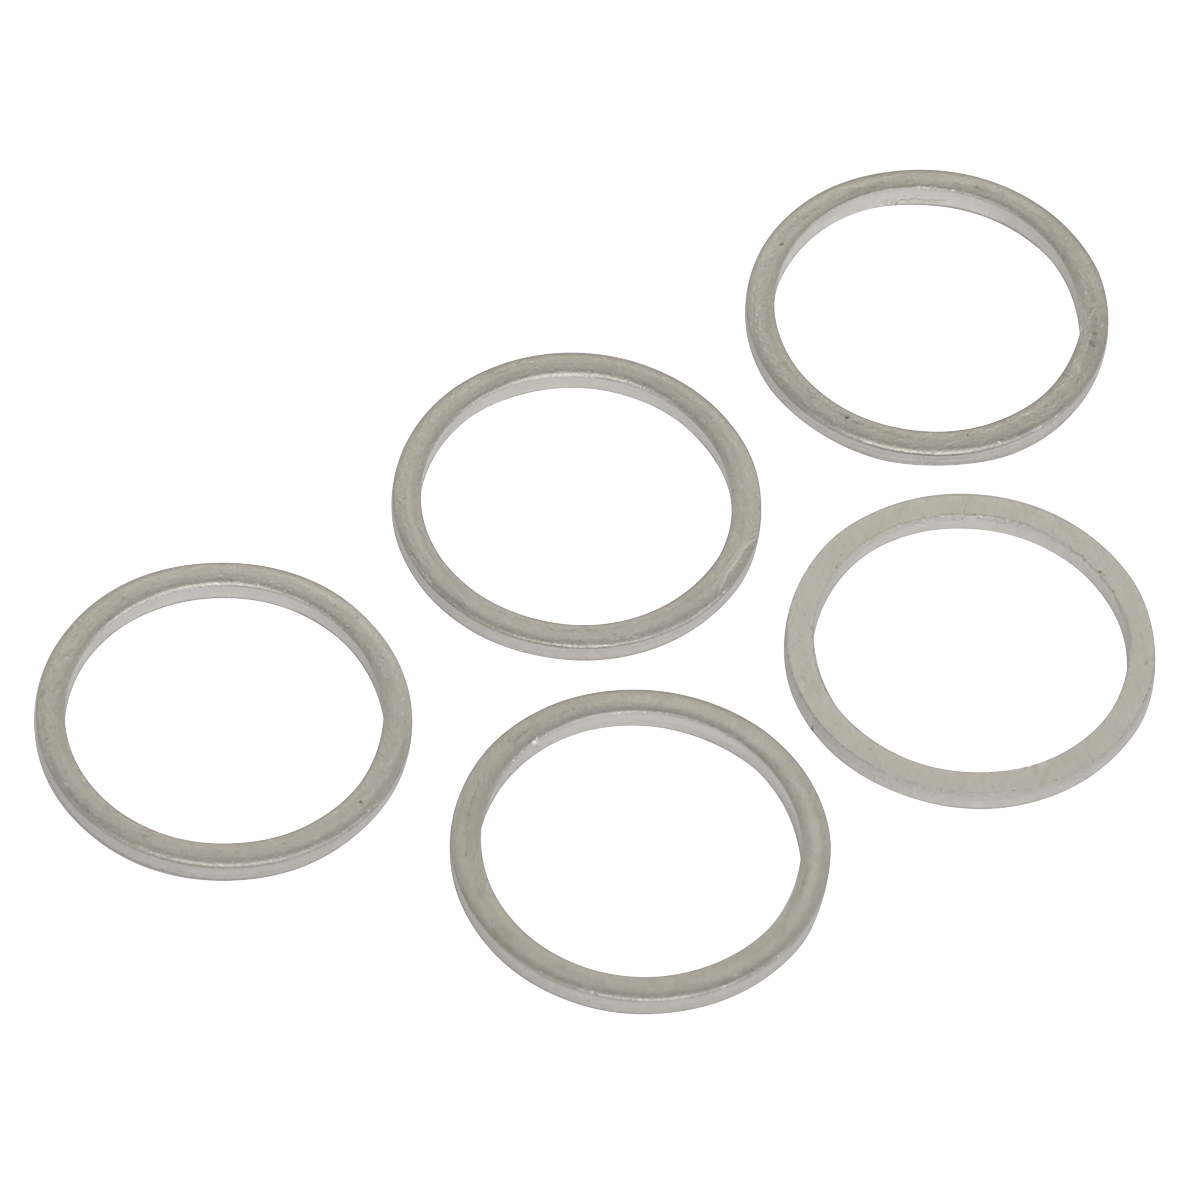 Sump Plug Washer M17 - Pack of 5 - VS17SPW - Farming Parts